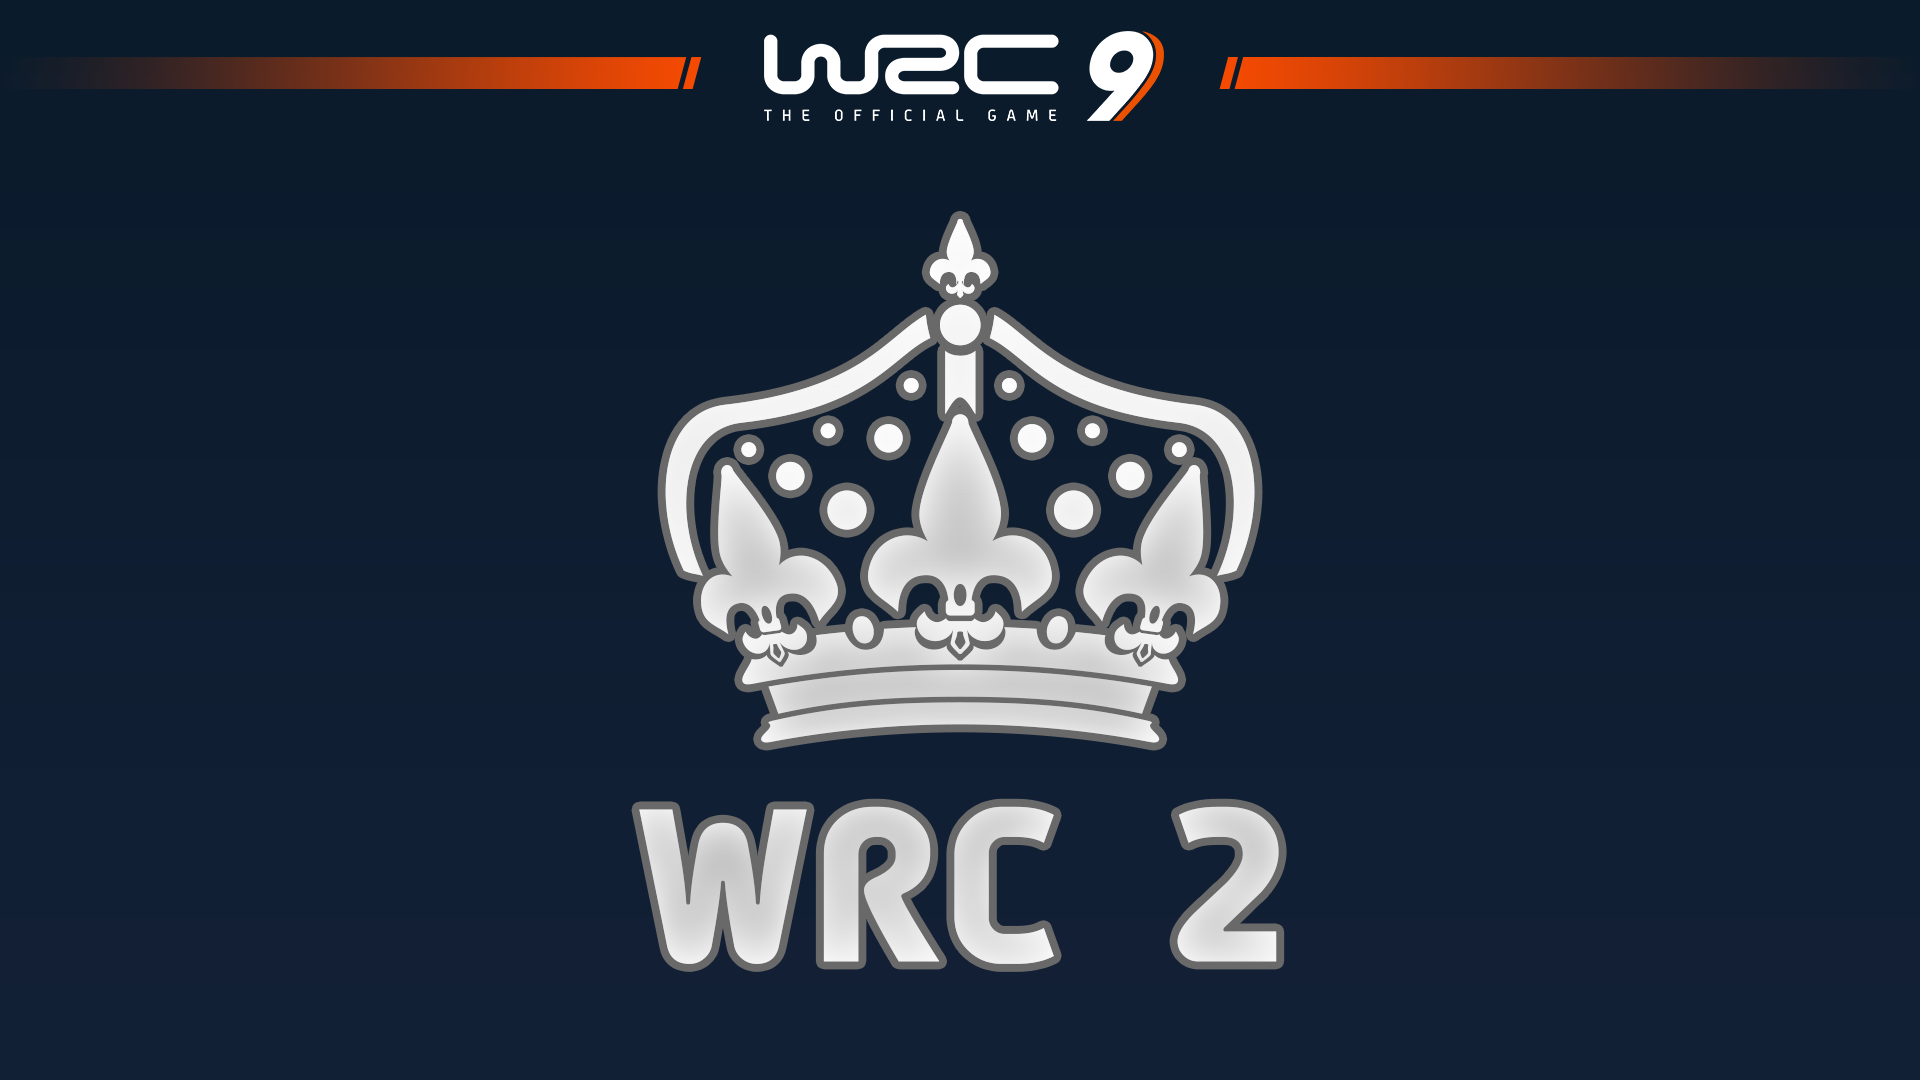 Icon for WRC 2 driver